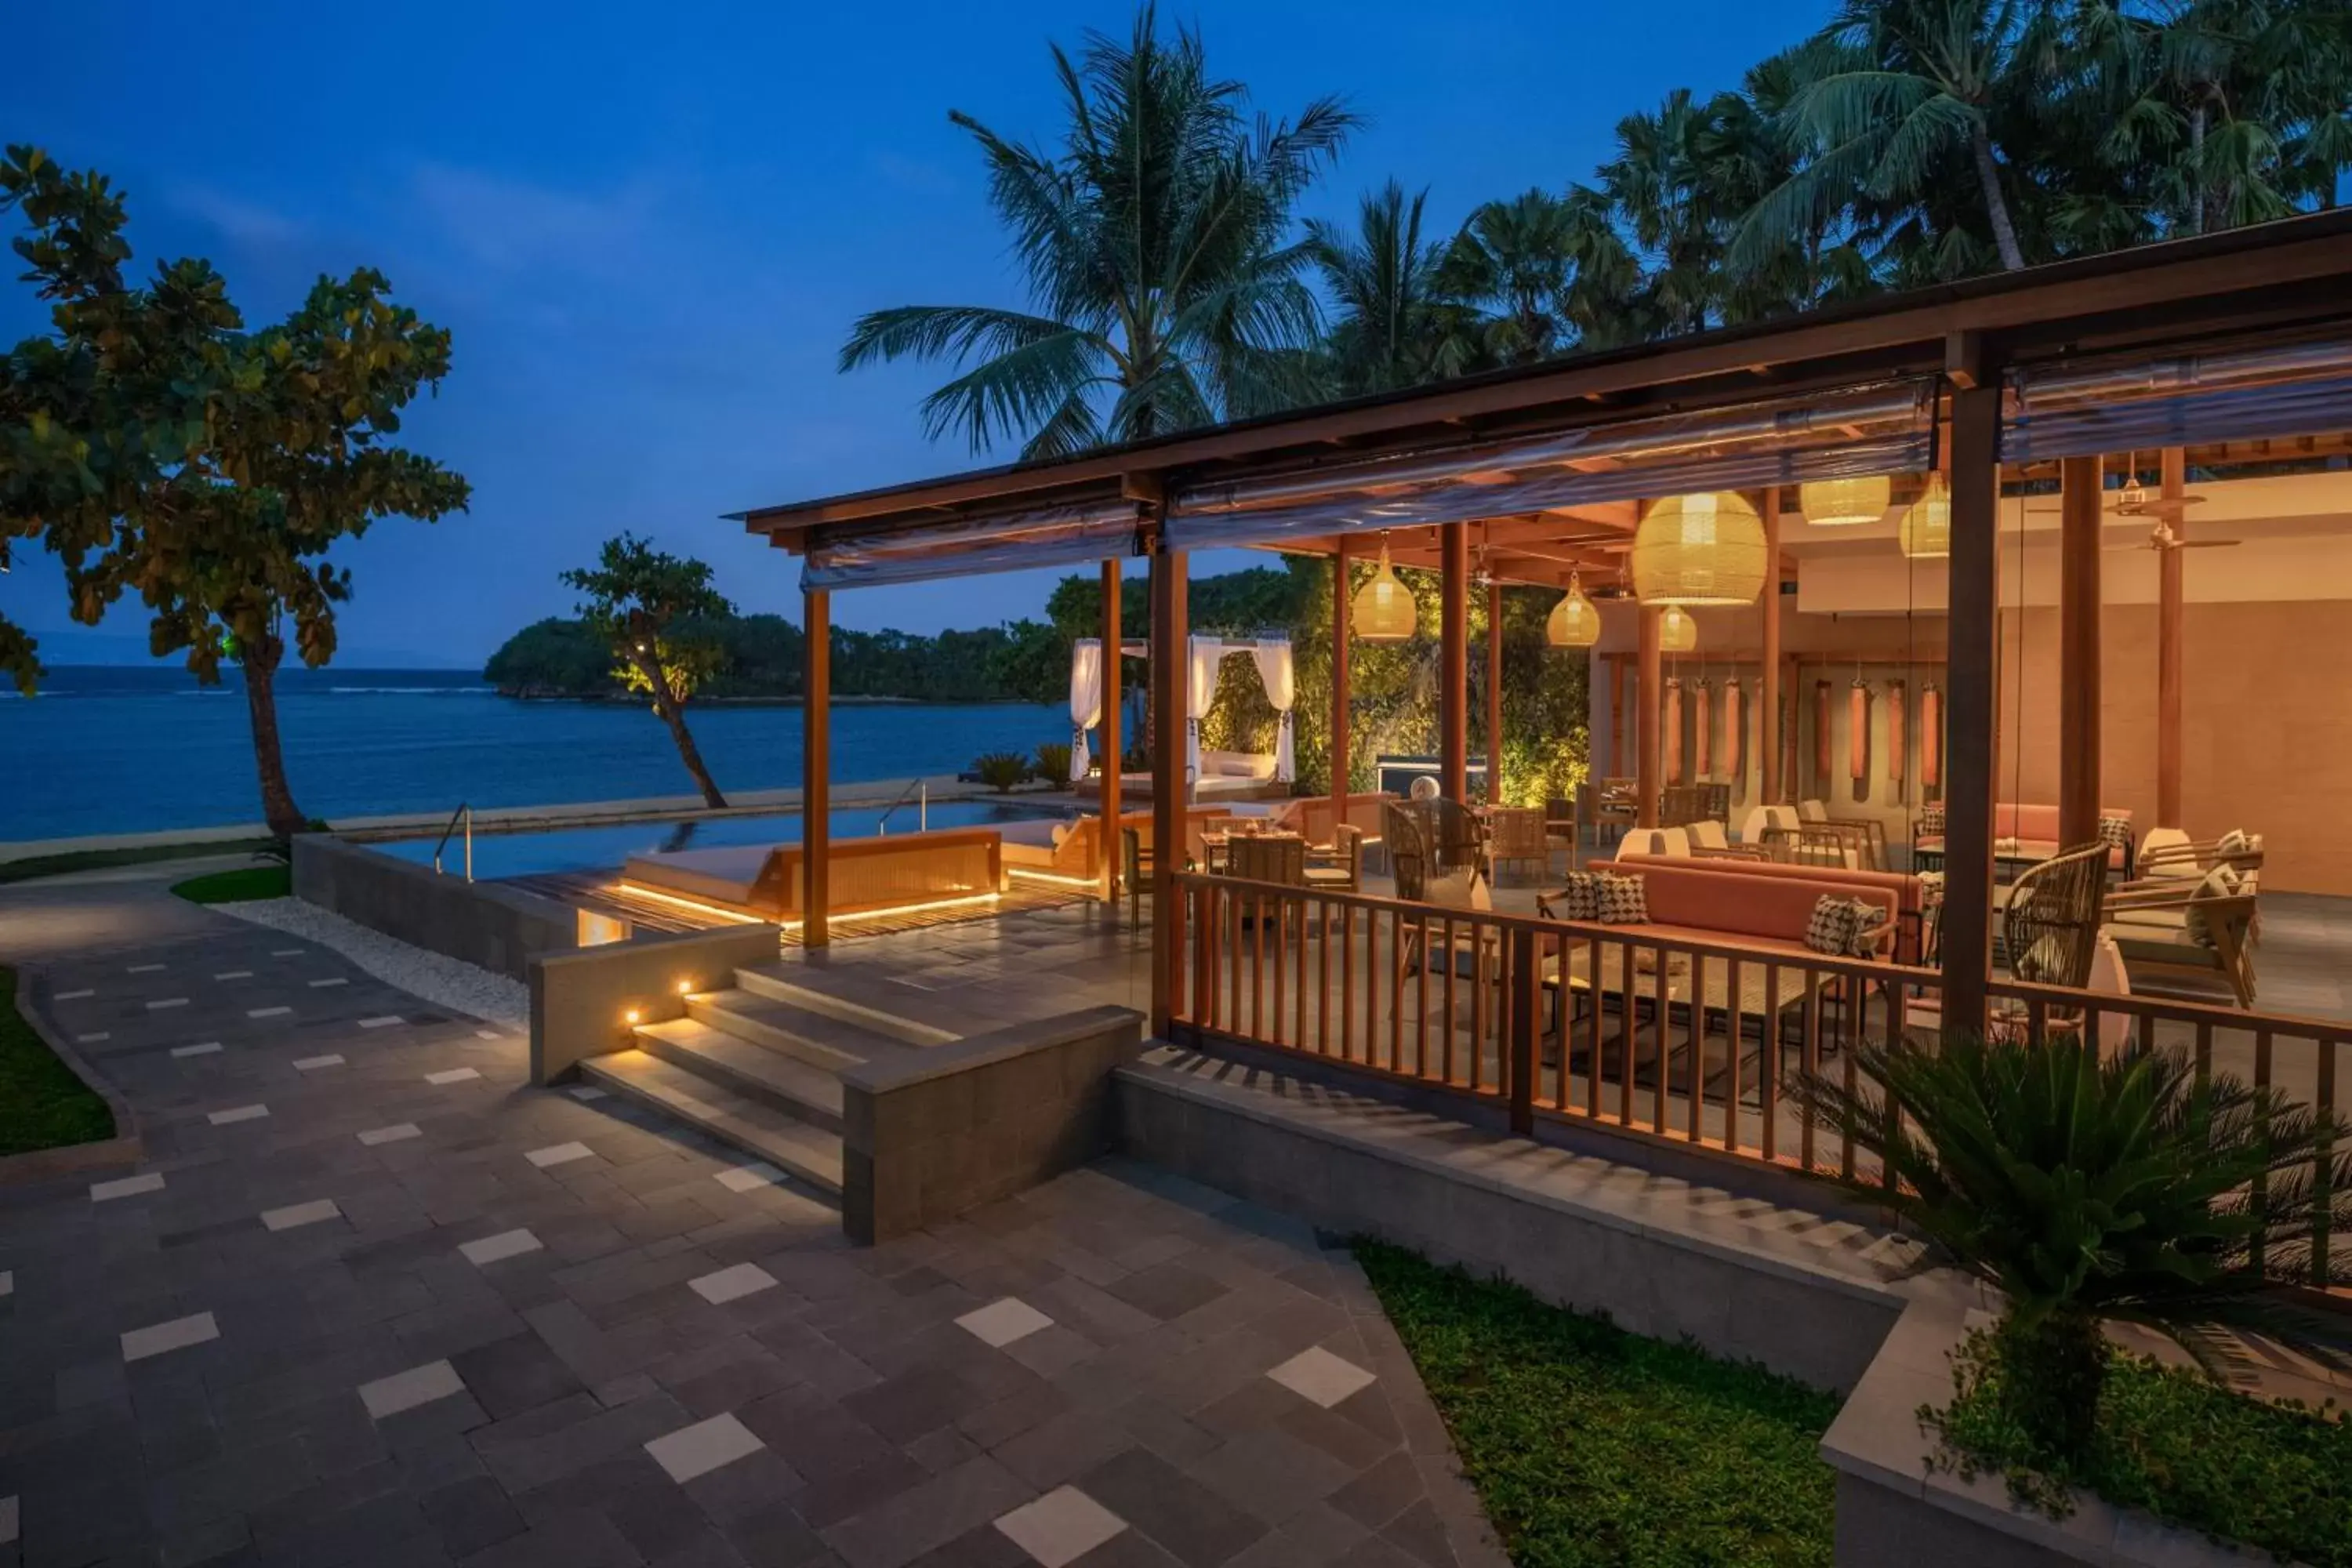 Property building in The Laguna, A Luxury Collection Resort & Spa, Nusa Dua, Bali